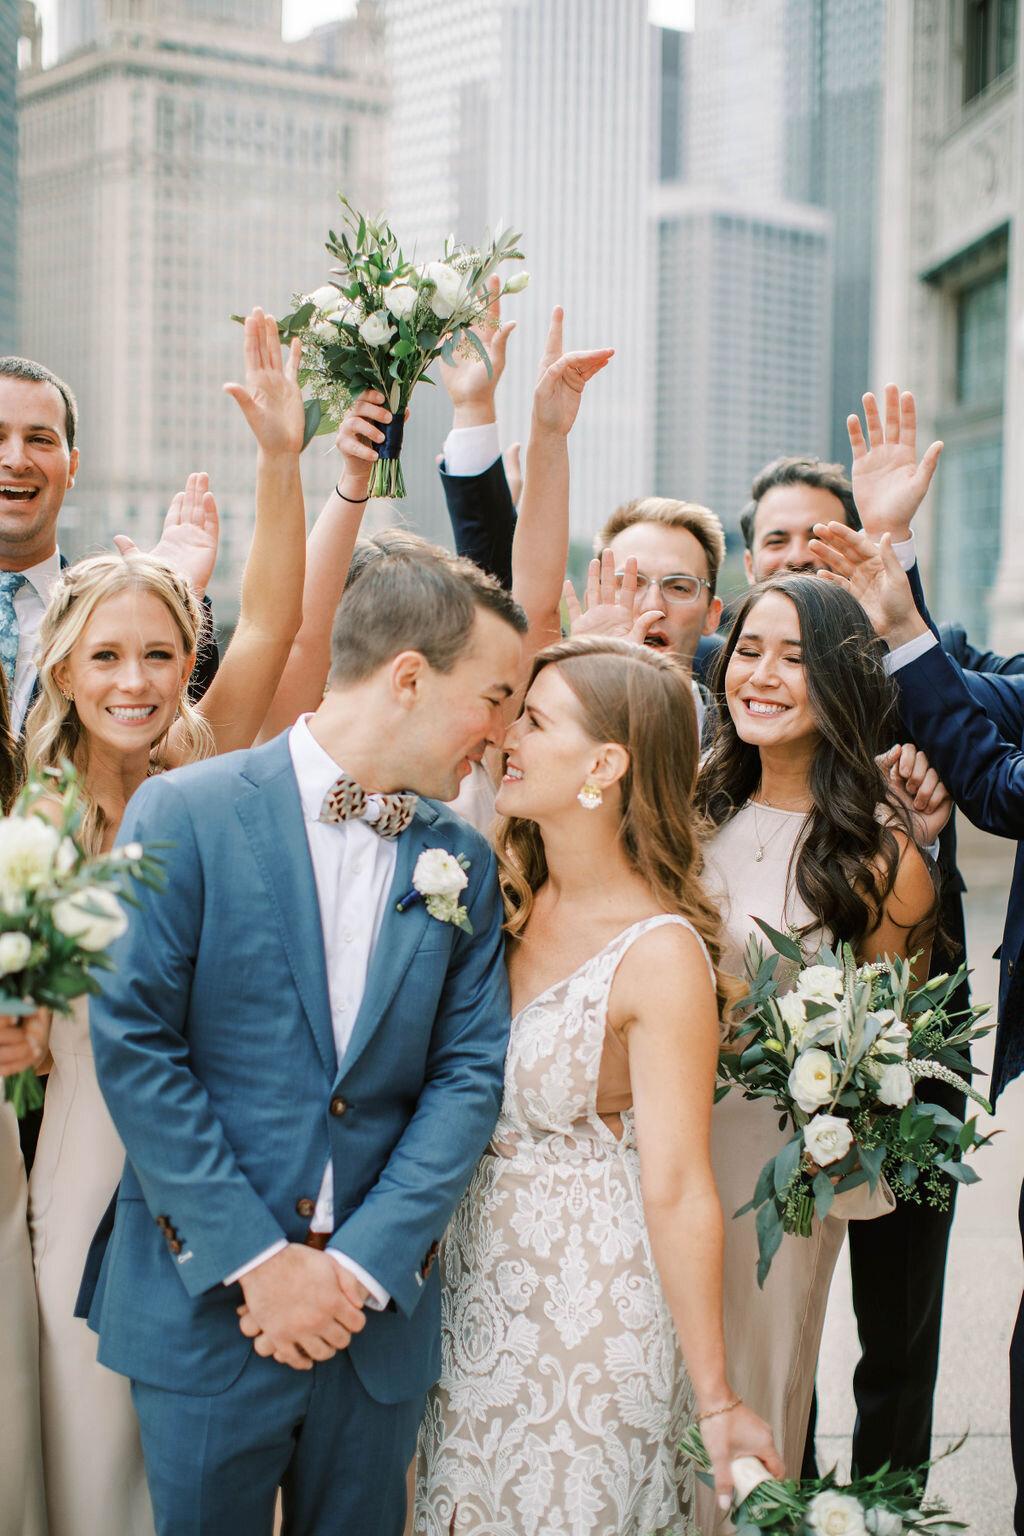 A Lush Micro-Wedding in Chicago with Shannon Gail Events &amp; Carriage House Photography